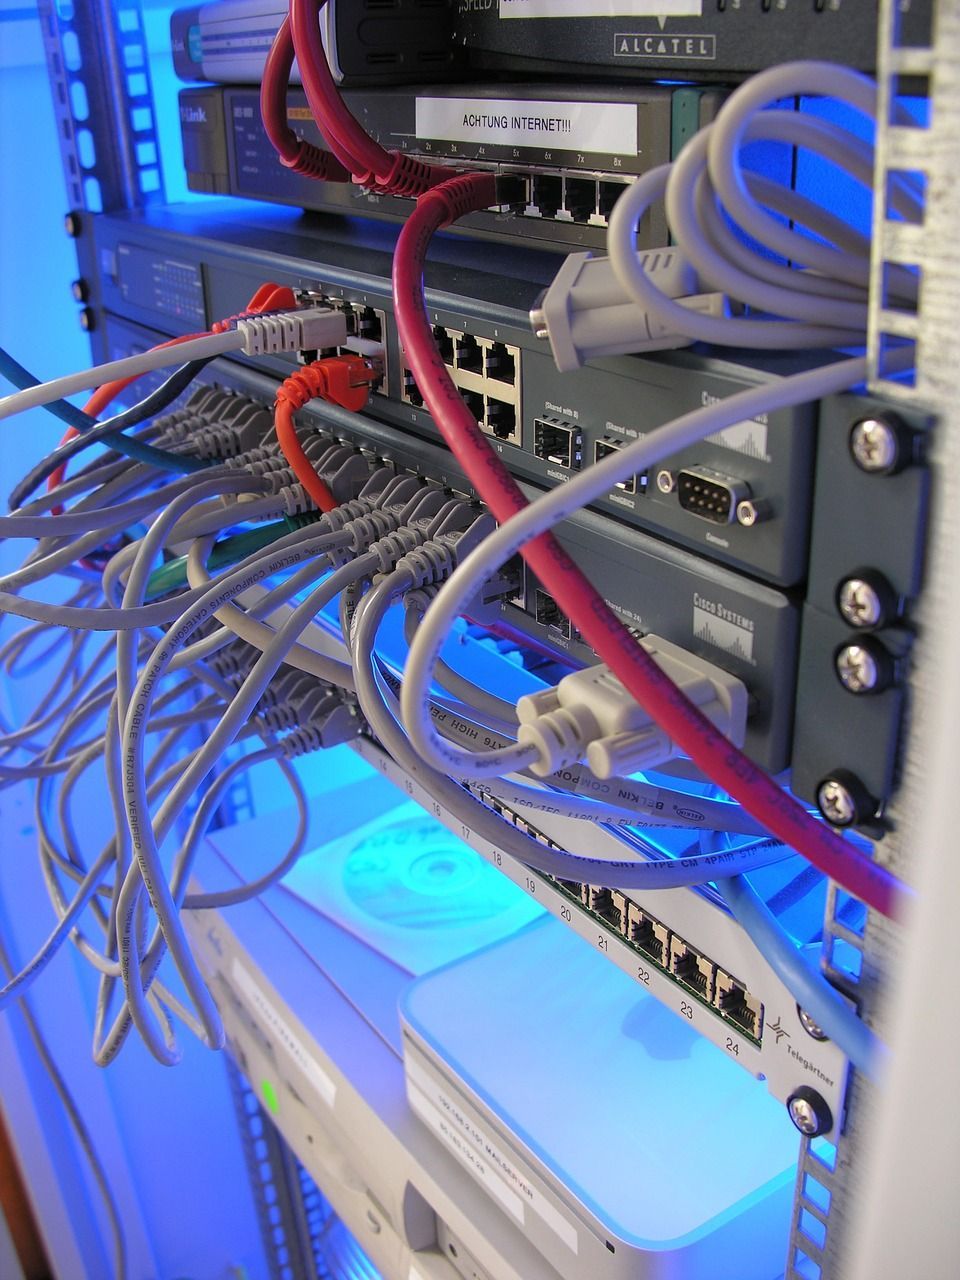 Image of a network router with wires plugging in to it